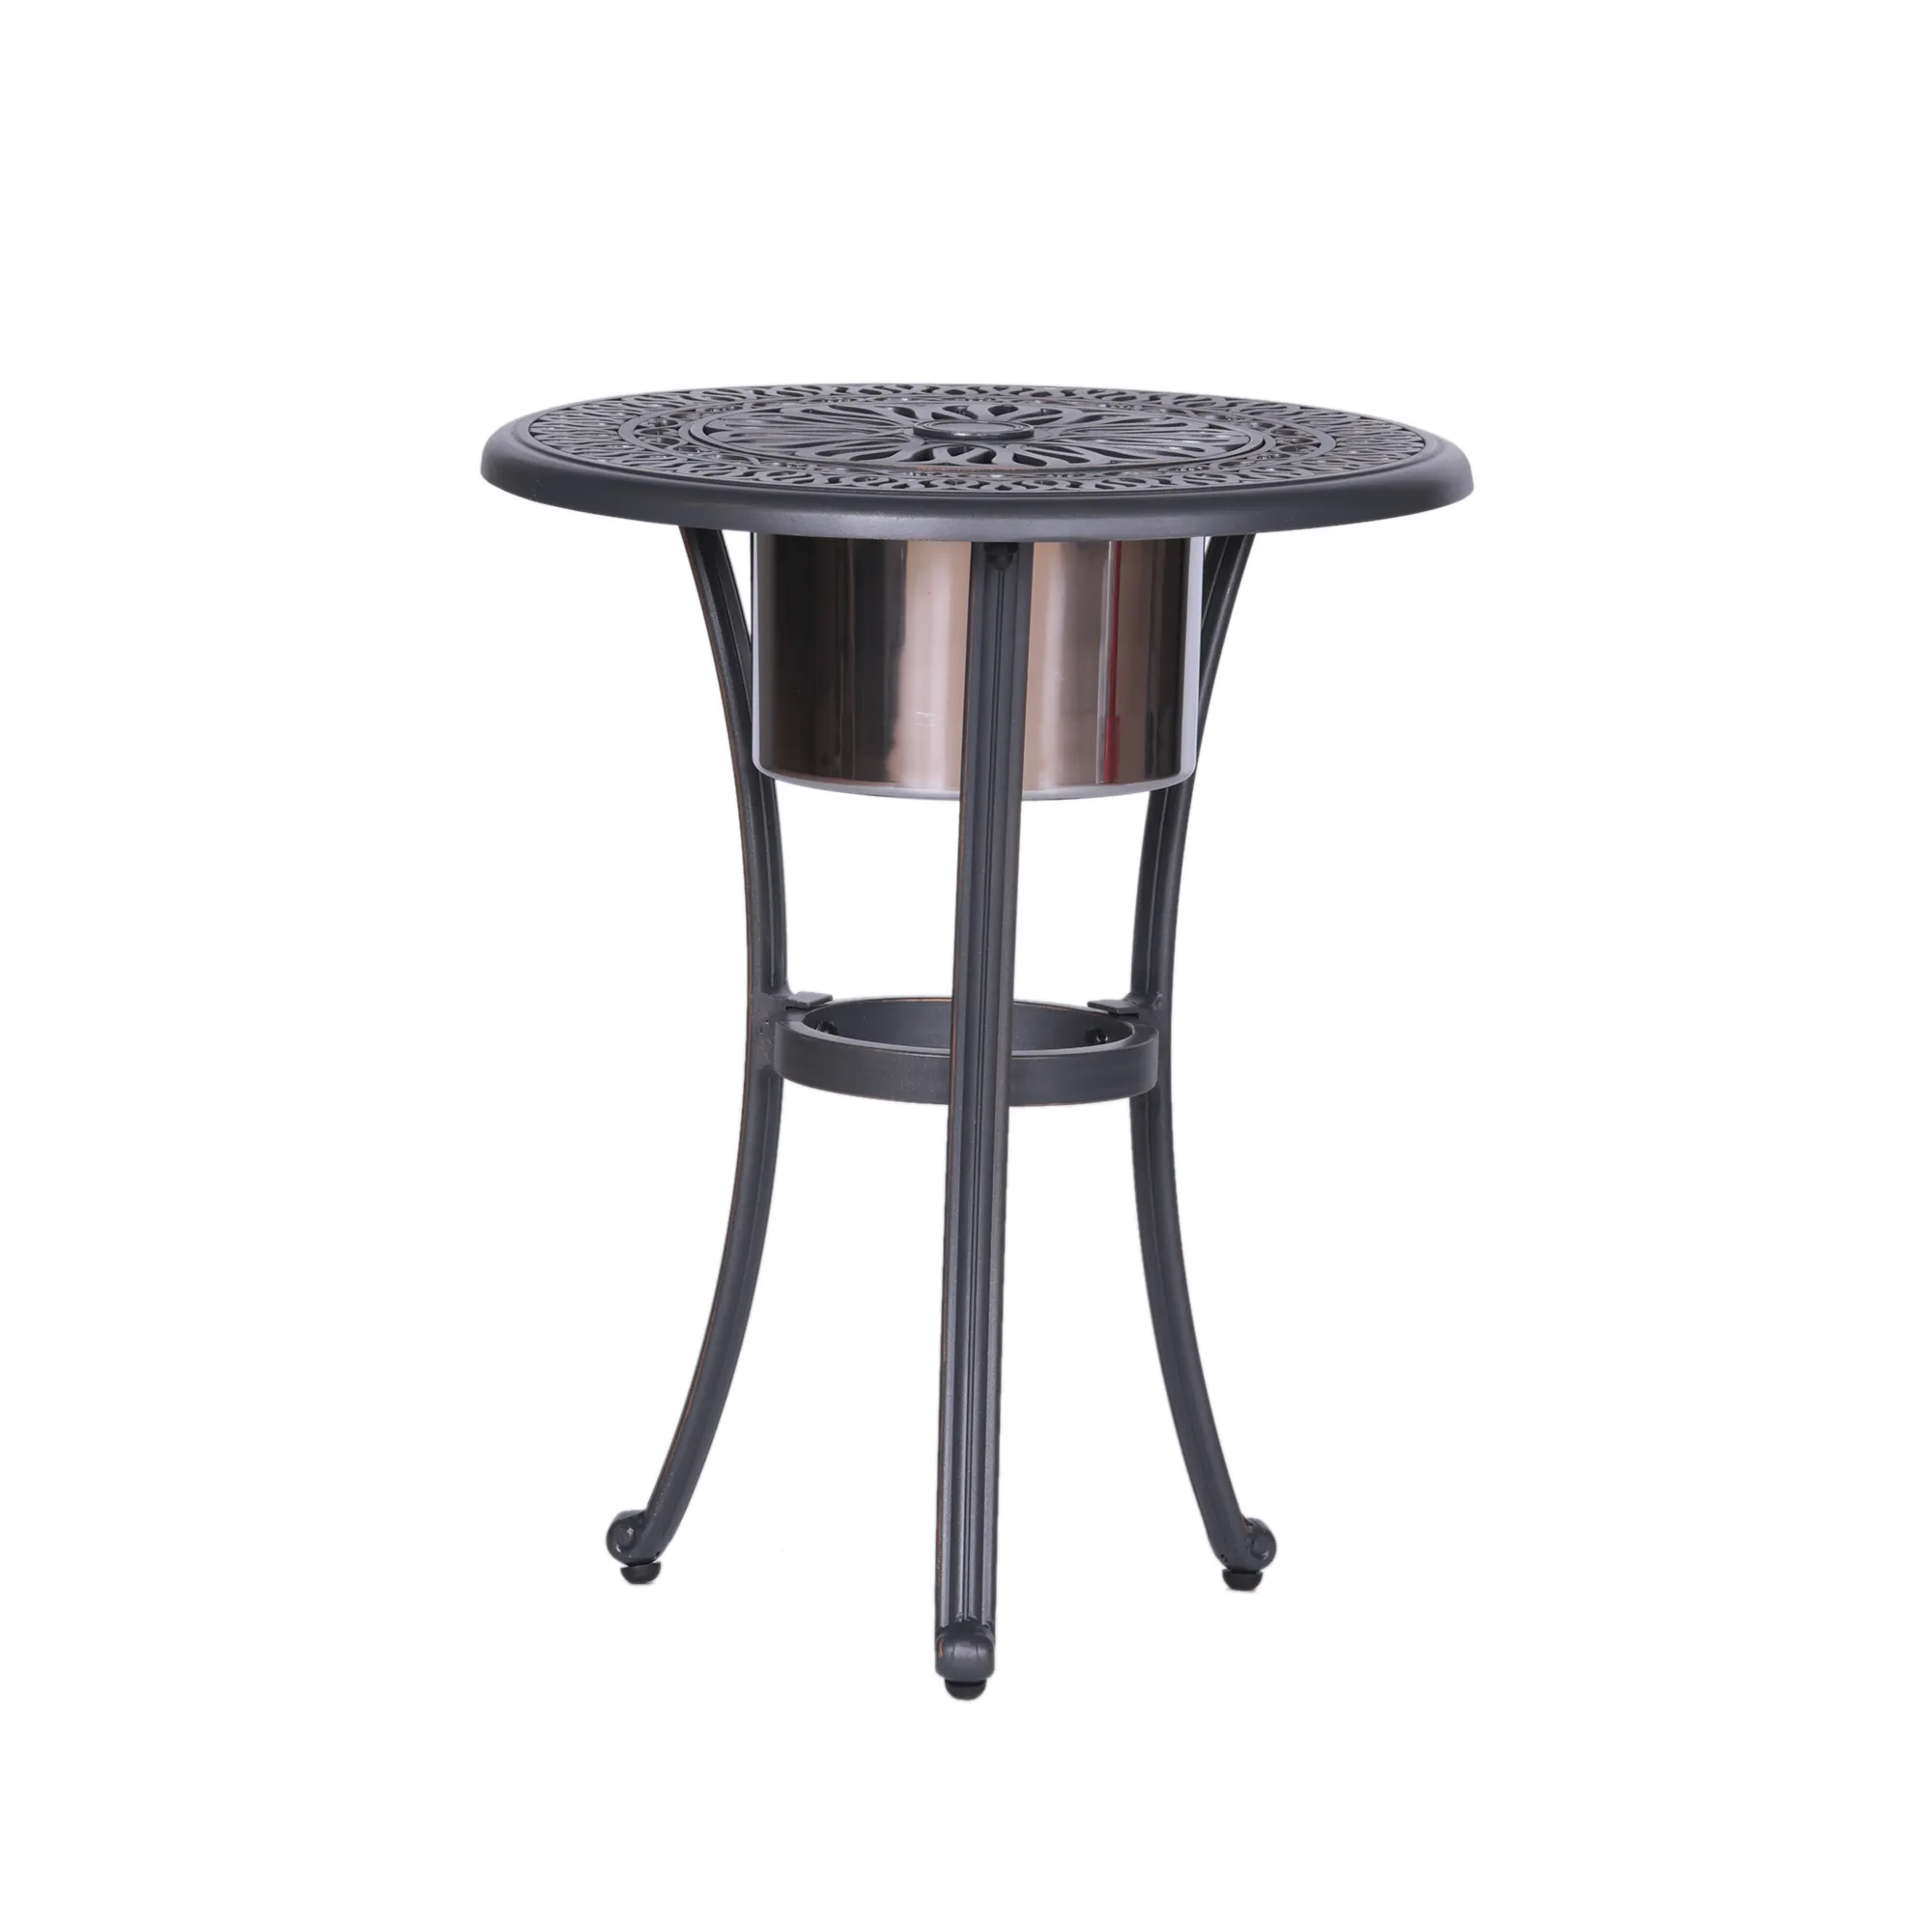 22" Round Ice Bucket Table in Black